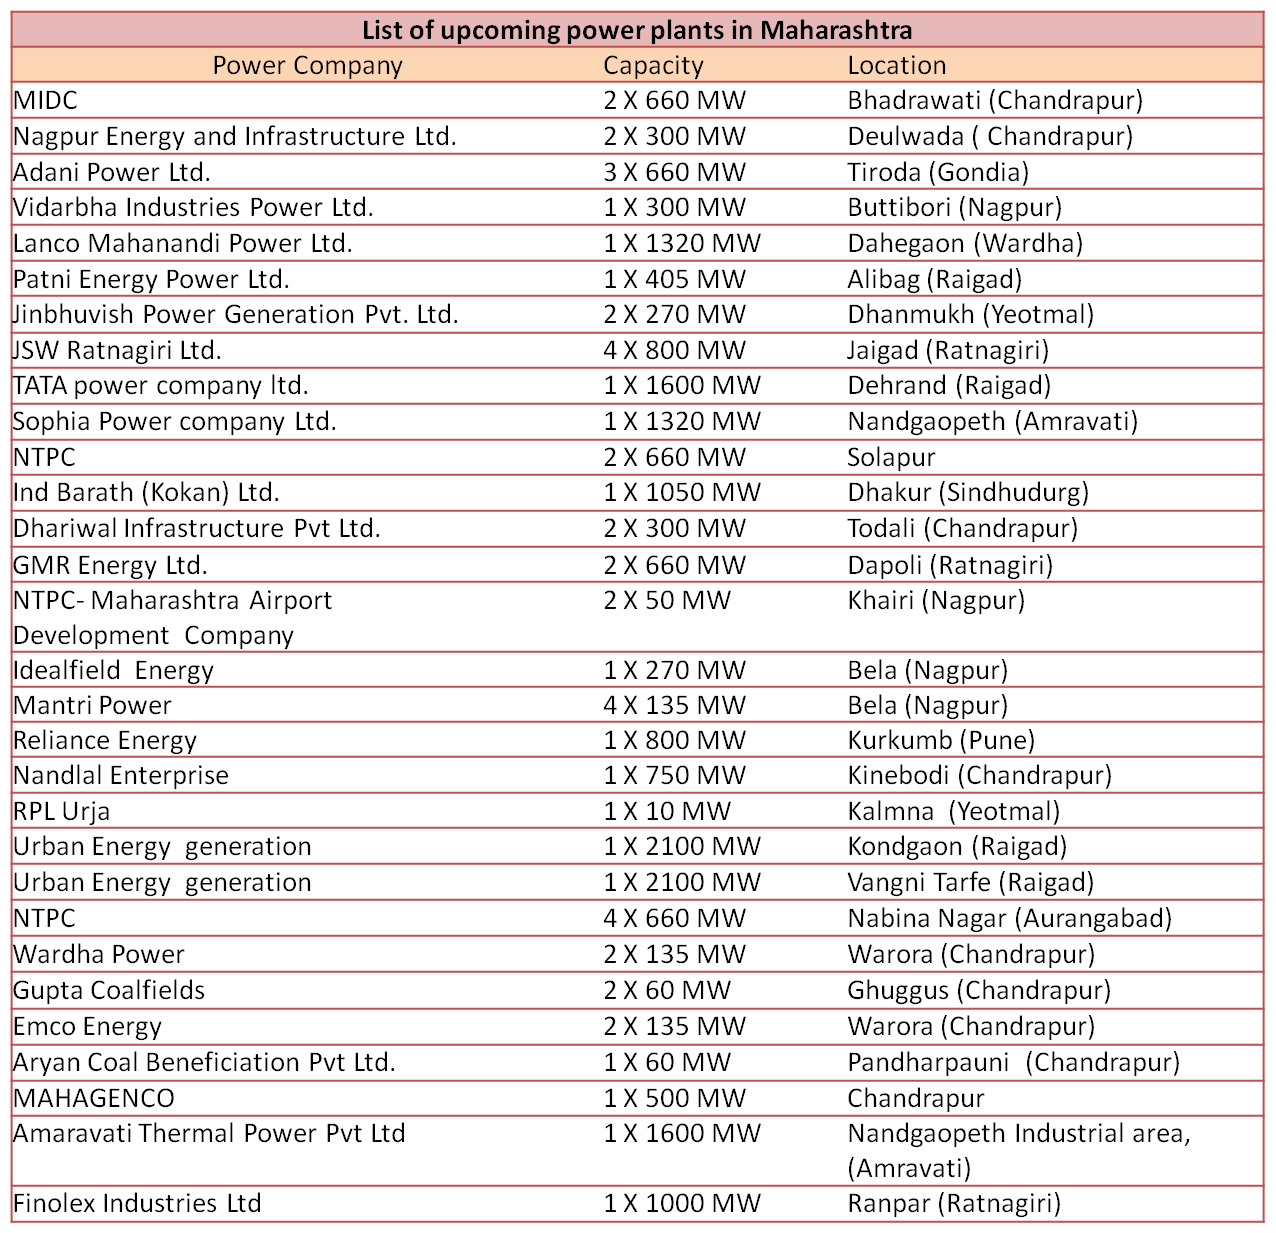 List of upcoming thermal power plants in Maharashtra